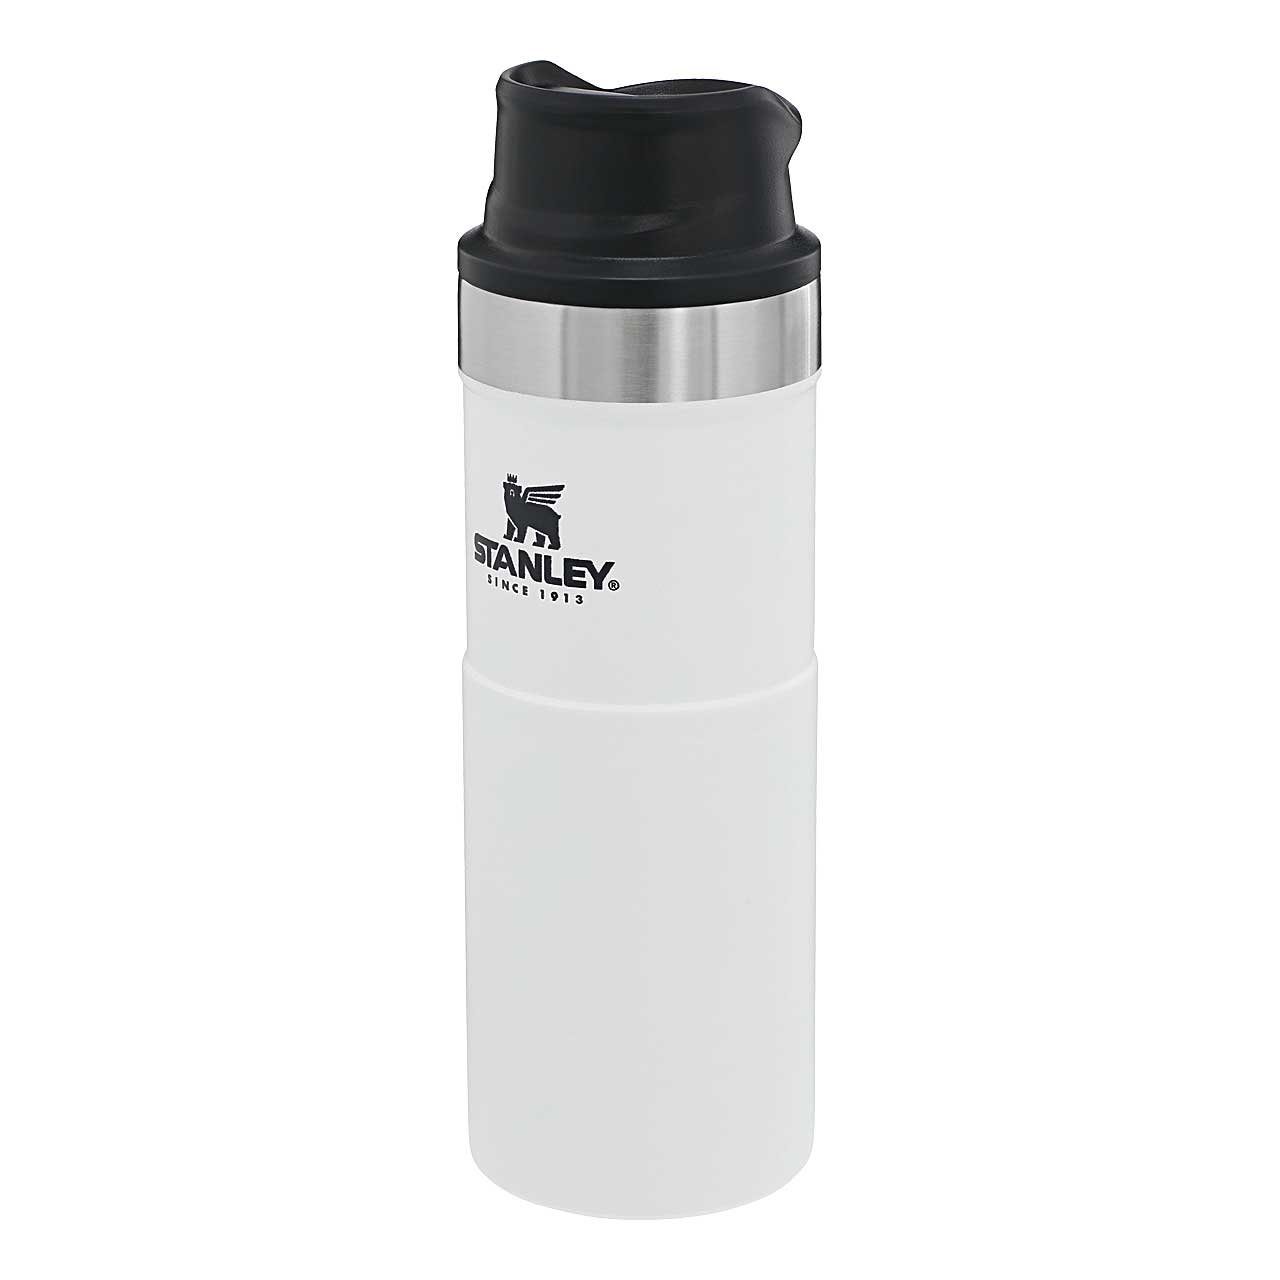 Kaffeebecher CLASSIC TRIGGER-ACTION Stanley STANLEY 0,473 White Polar l Coffee-to-go-Becher